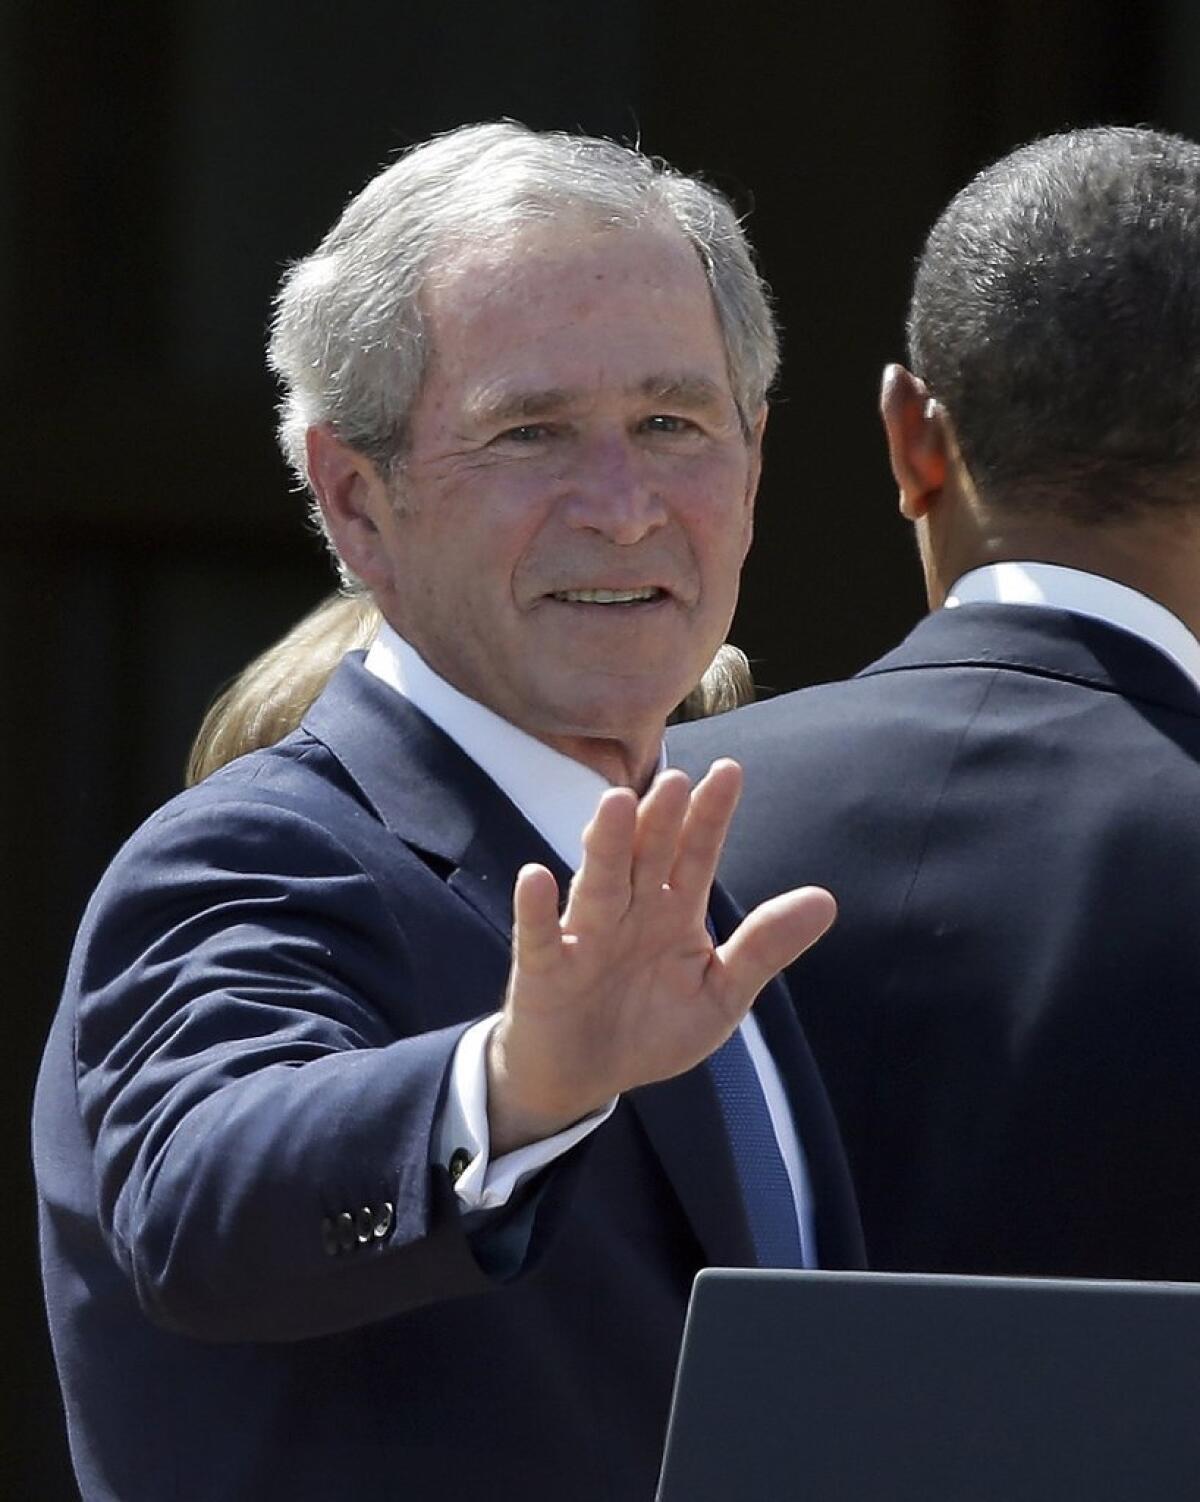 President George W. Bush had a stent placed in a coronary artery Tuesday.